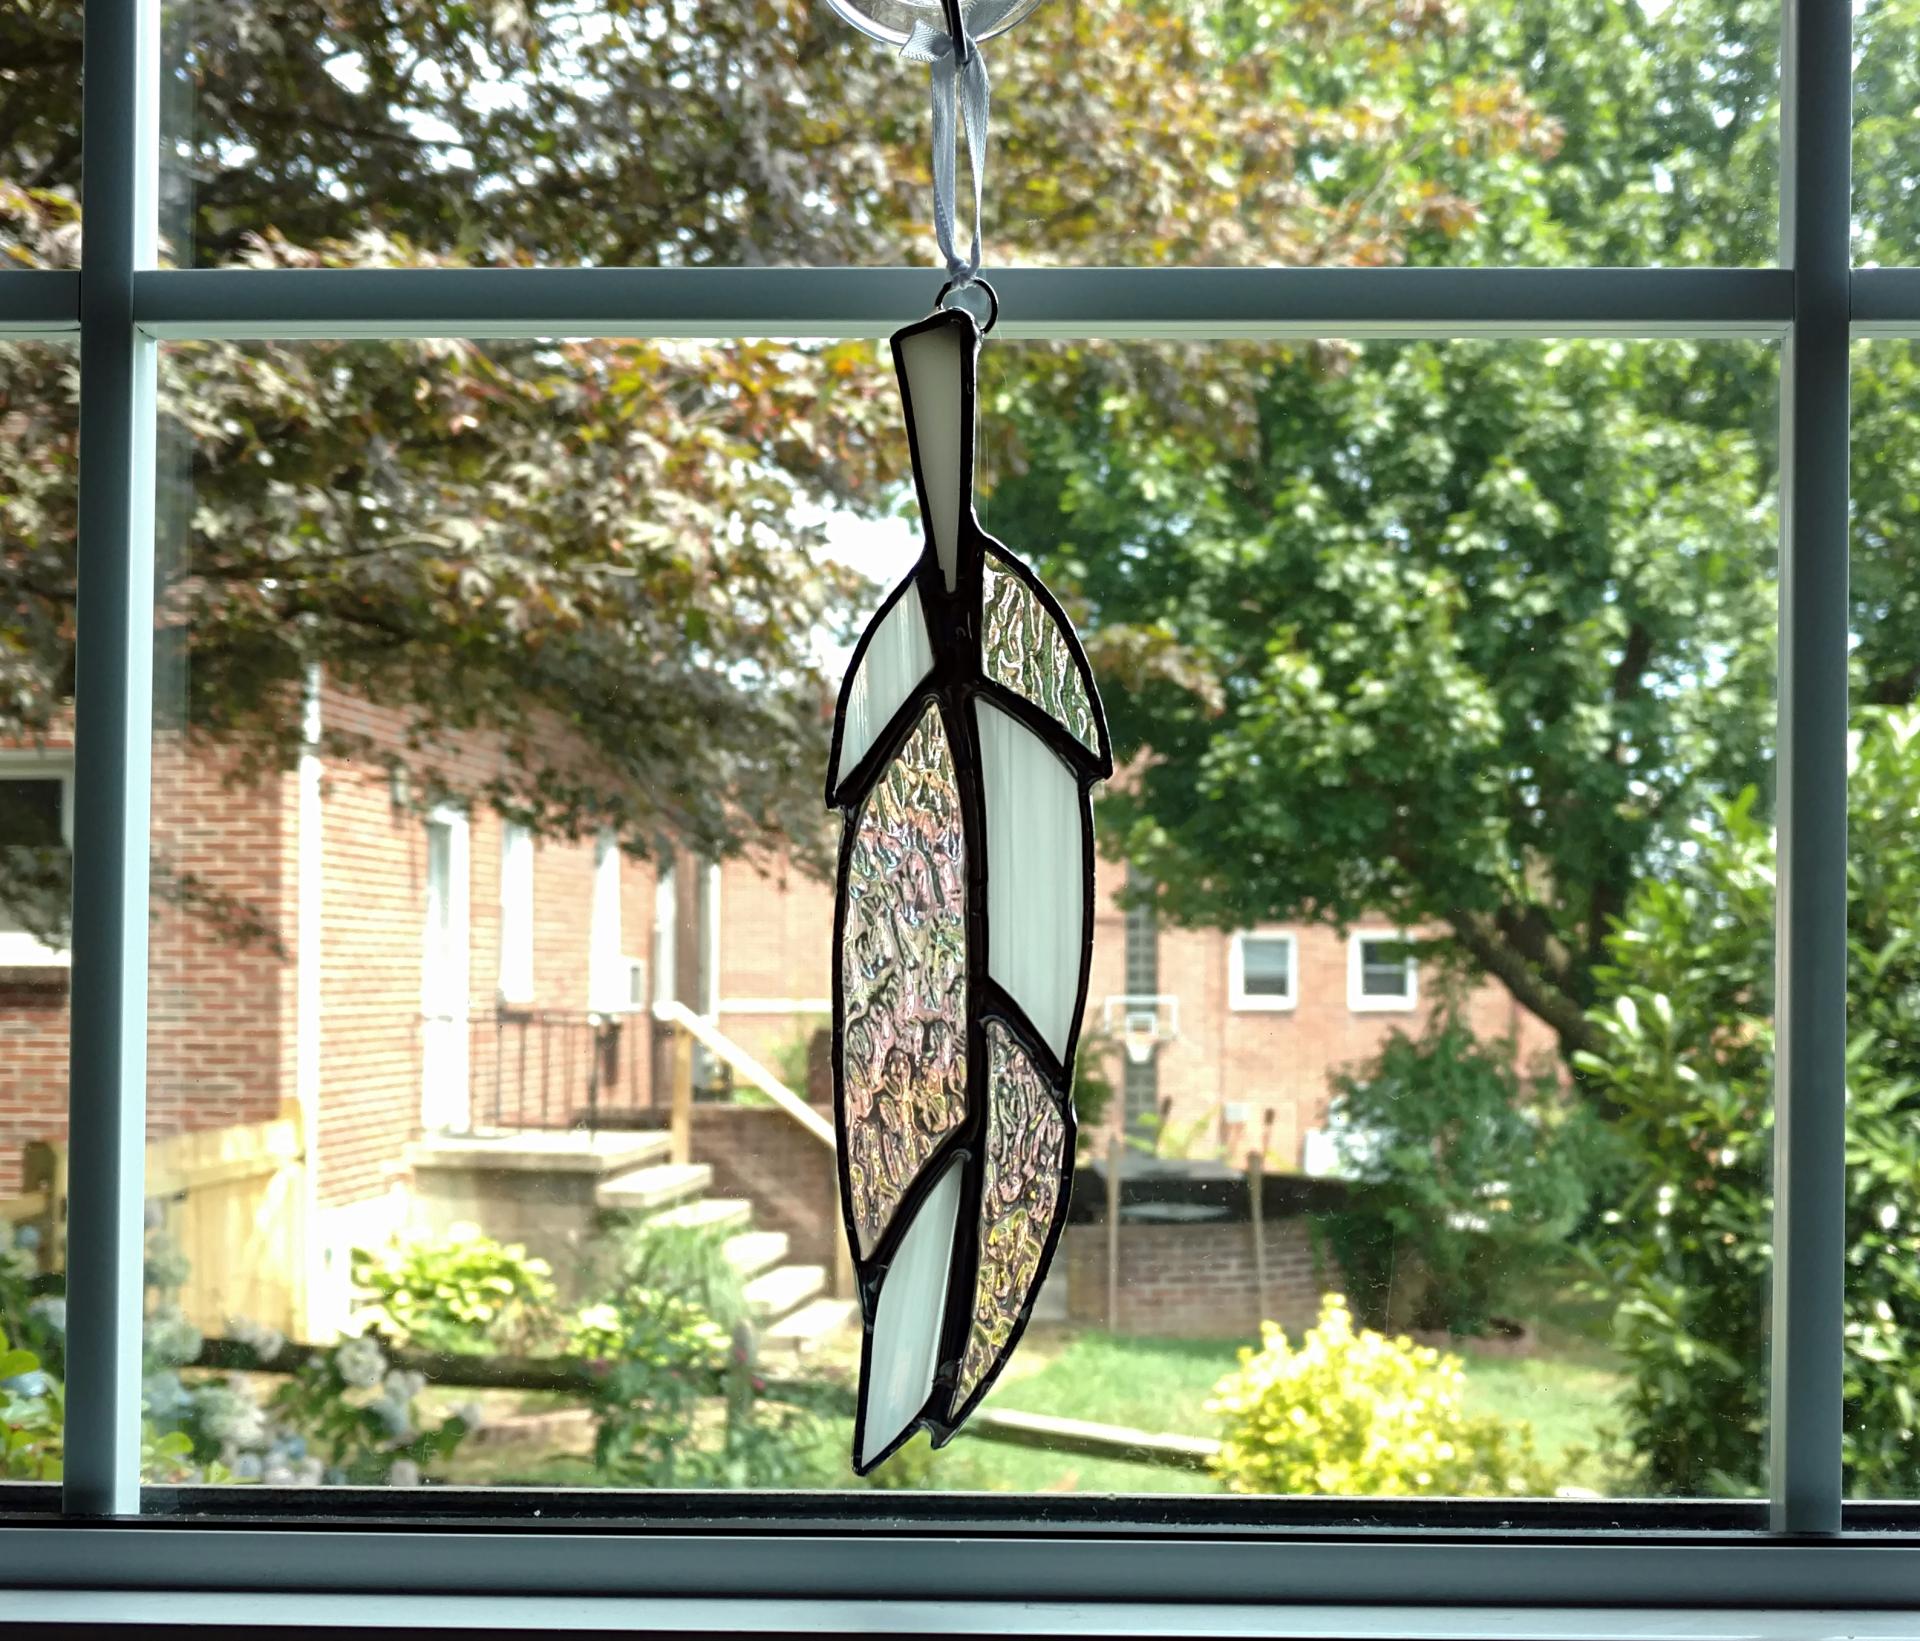 Stained Glass Feather Suncatcher, Iridescent Clear and White